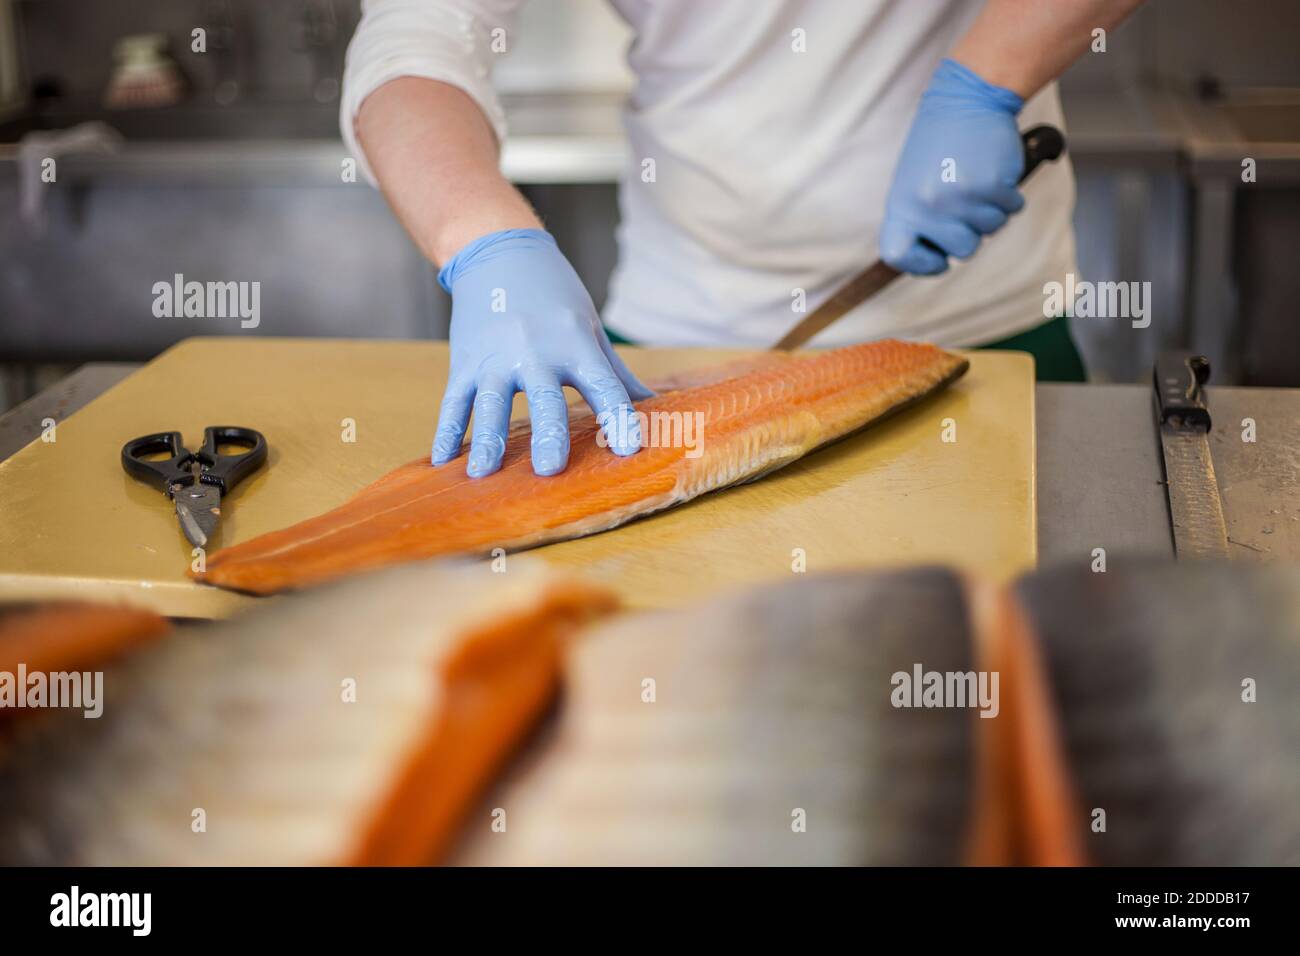 Man cutting fish at counter in food processing plant Stock Photo